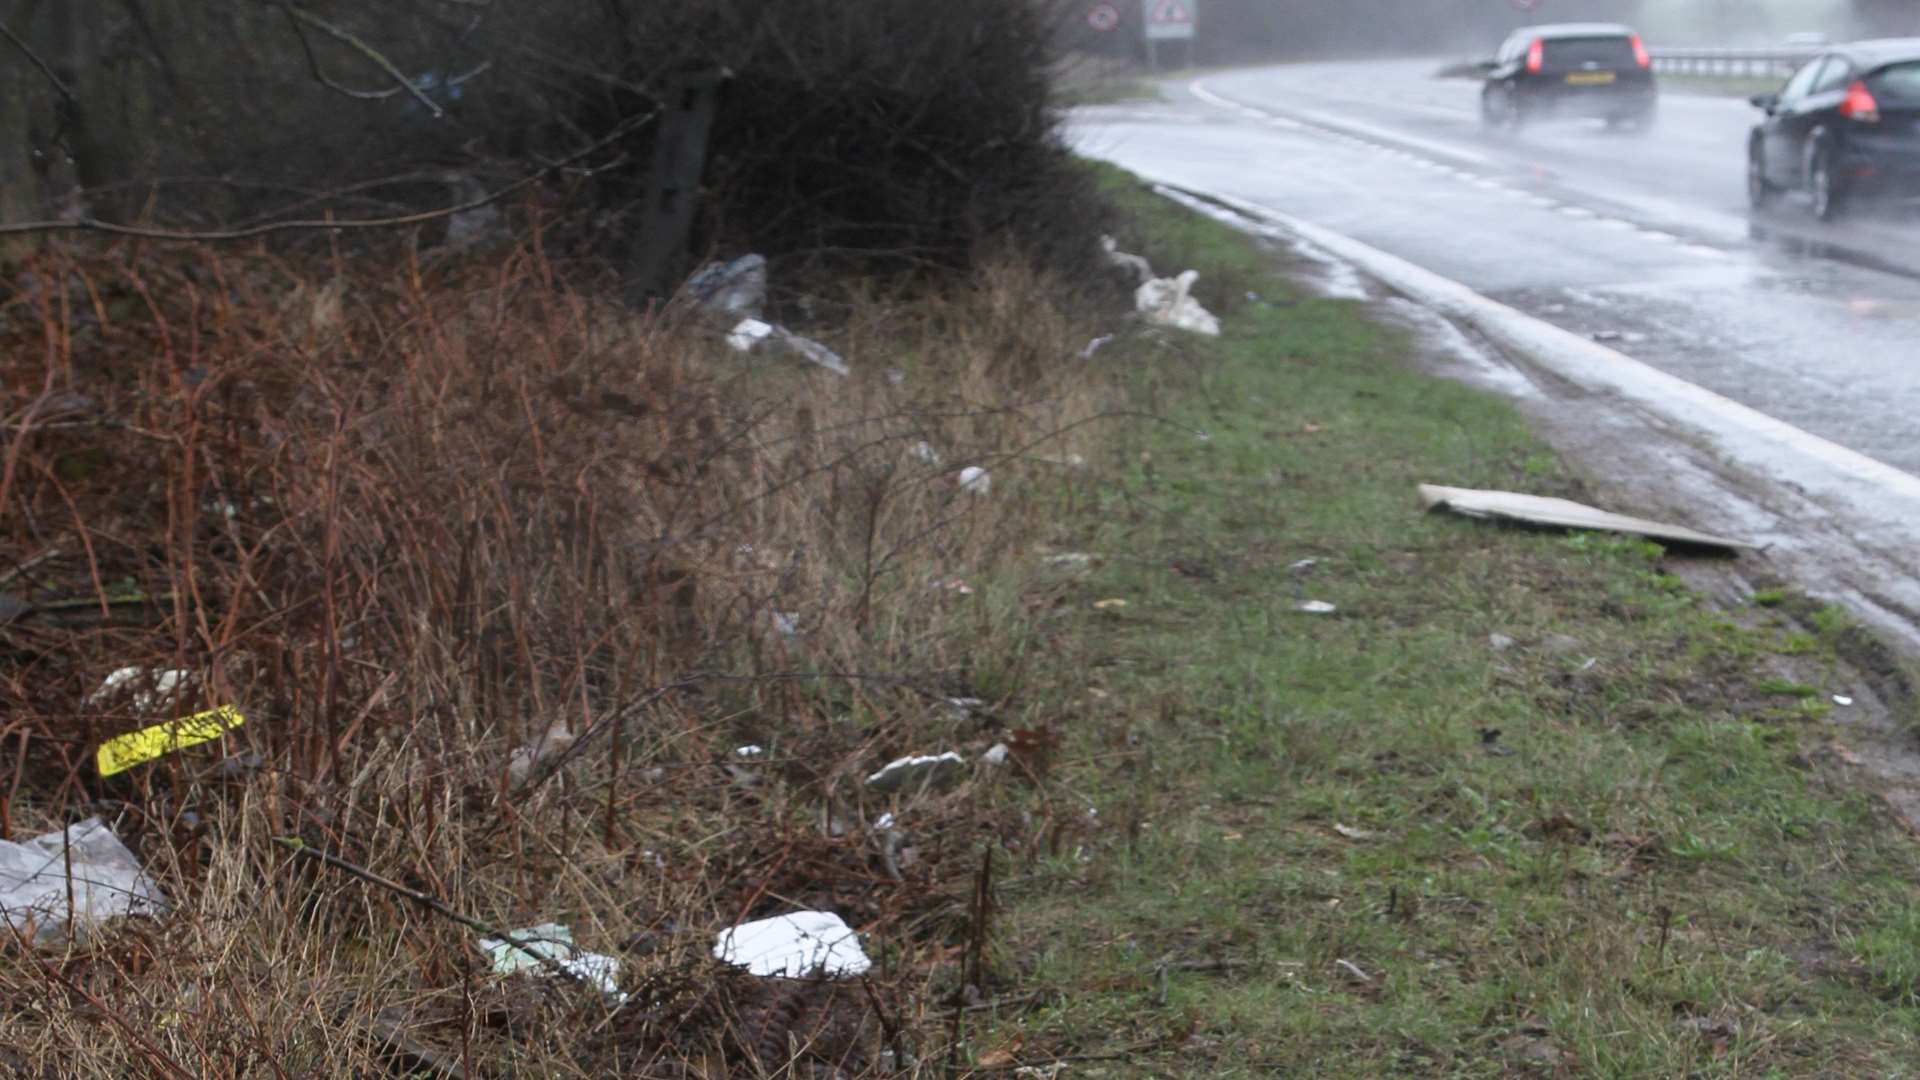 Littered verges are common on main roads.